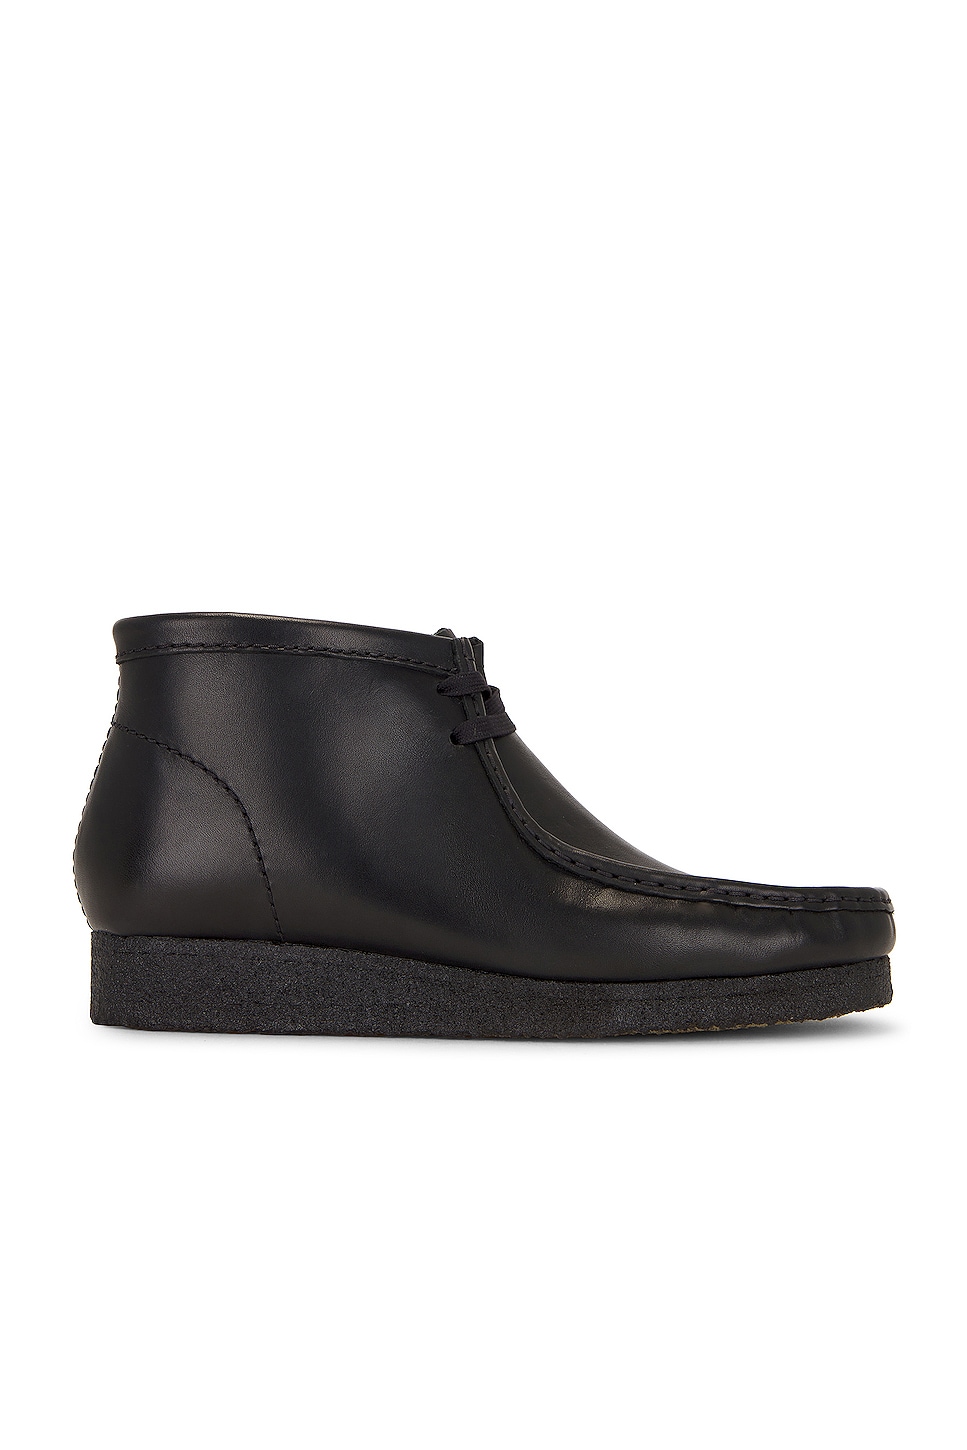 Image 1 of Clarks Wallabee Boot in Black